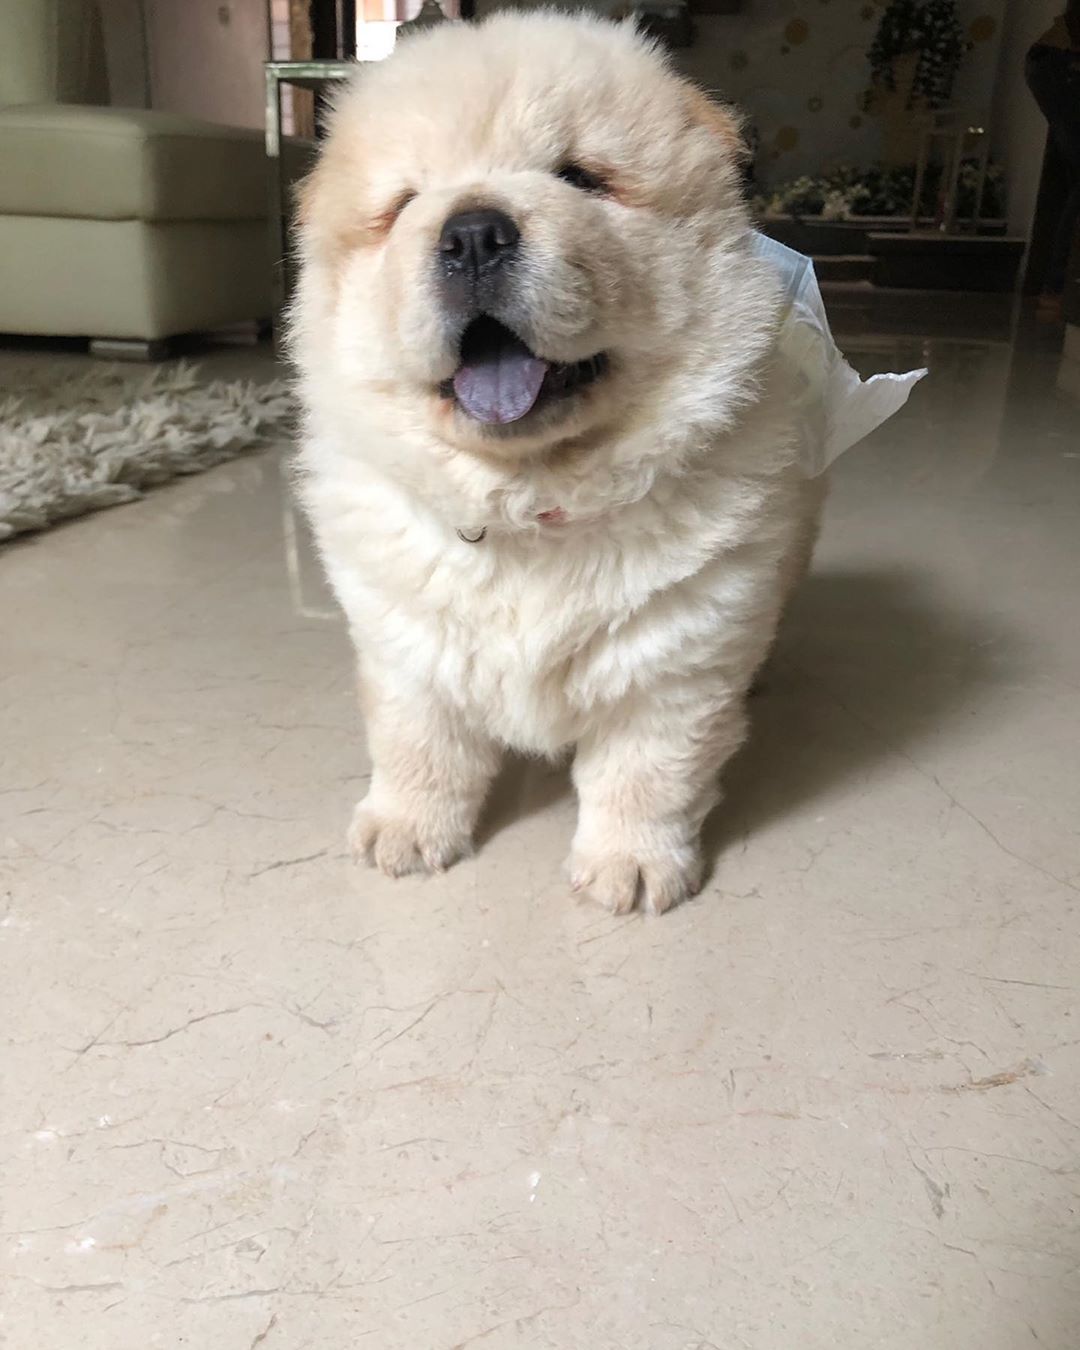 A Chow Chow standing on the floor